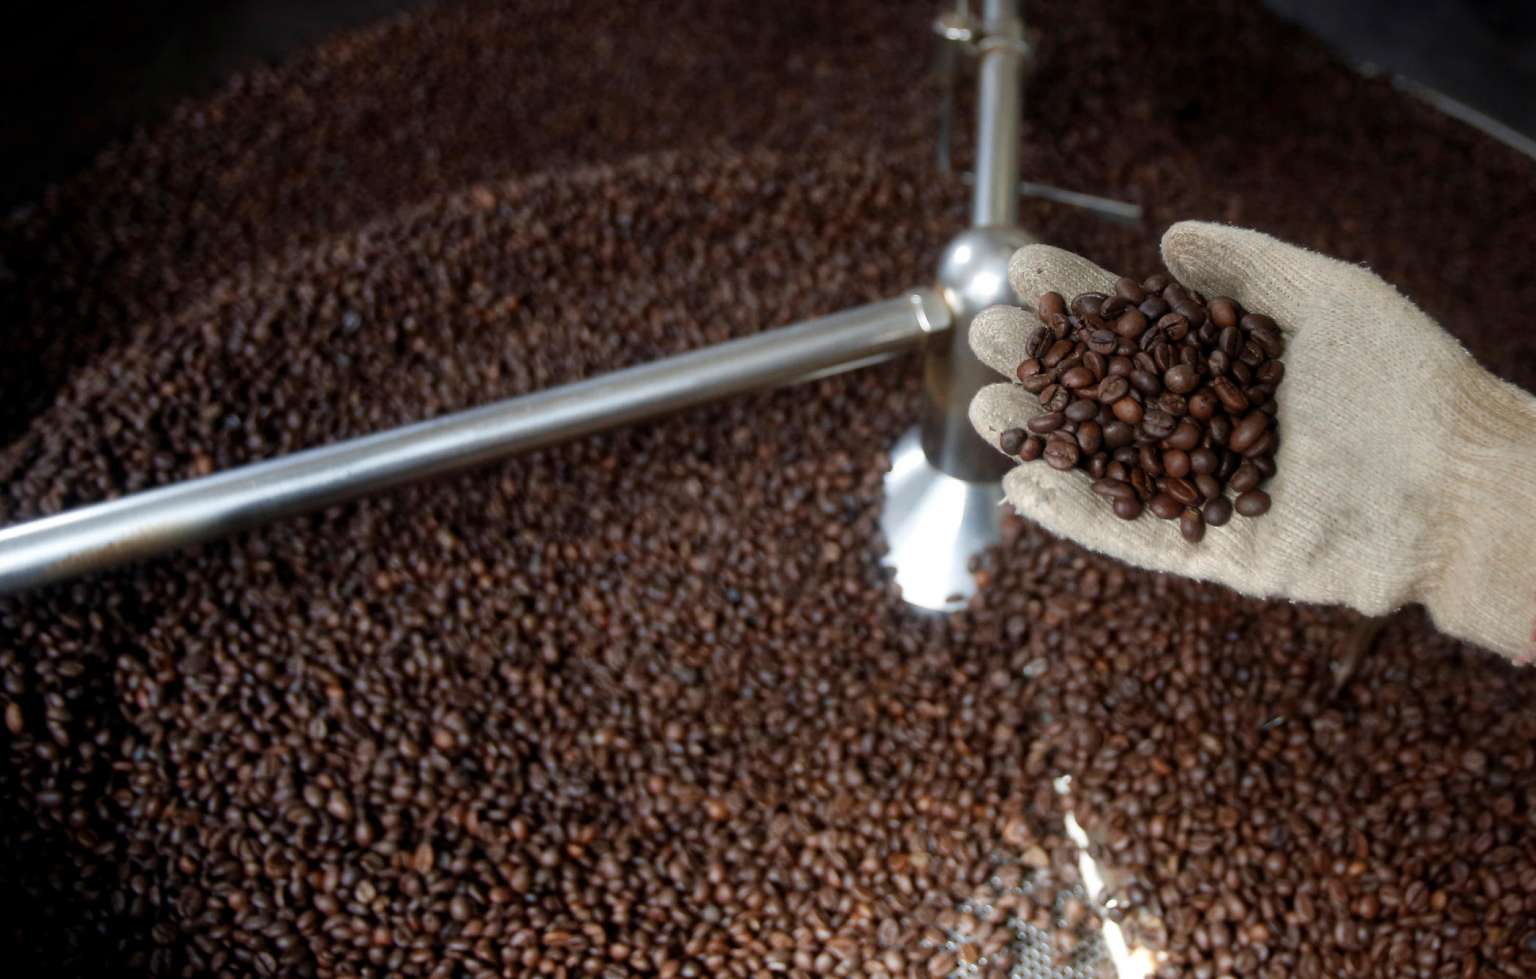 Asia Coffee Vietnam prices rise following London cues, Indonesia quiet